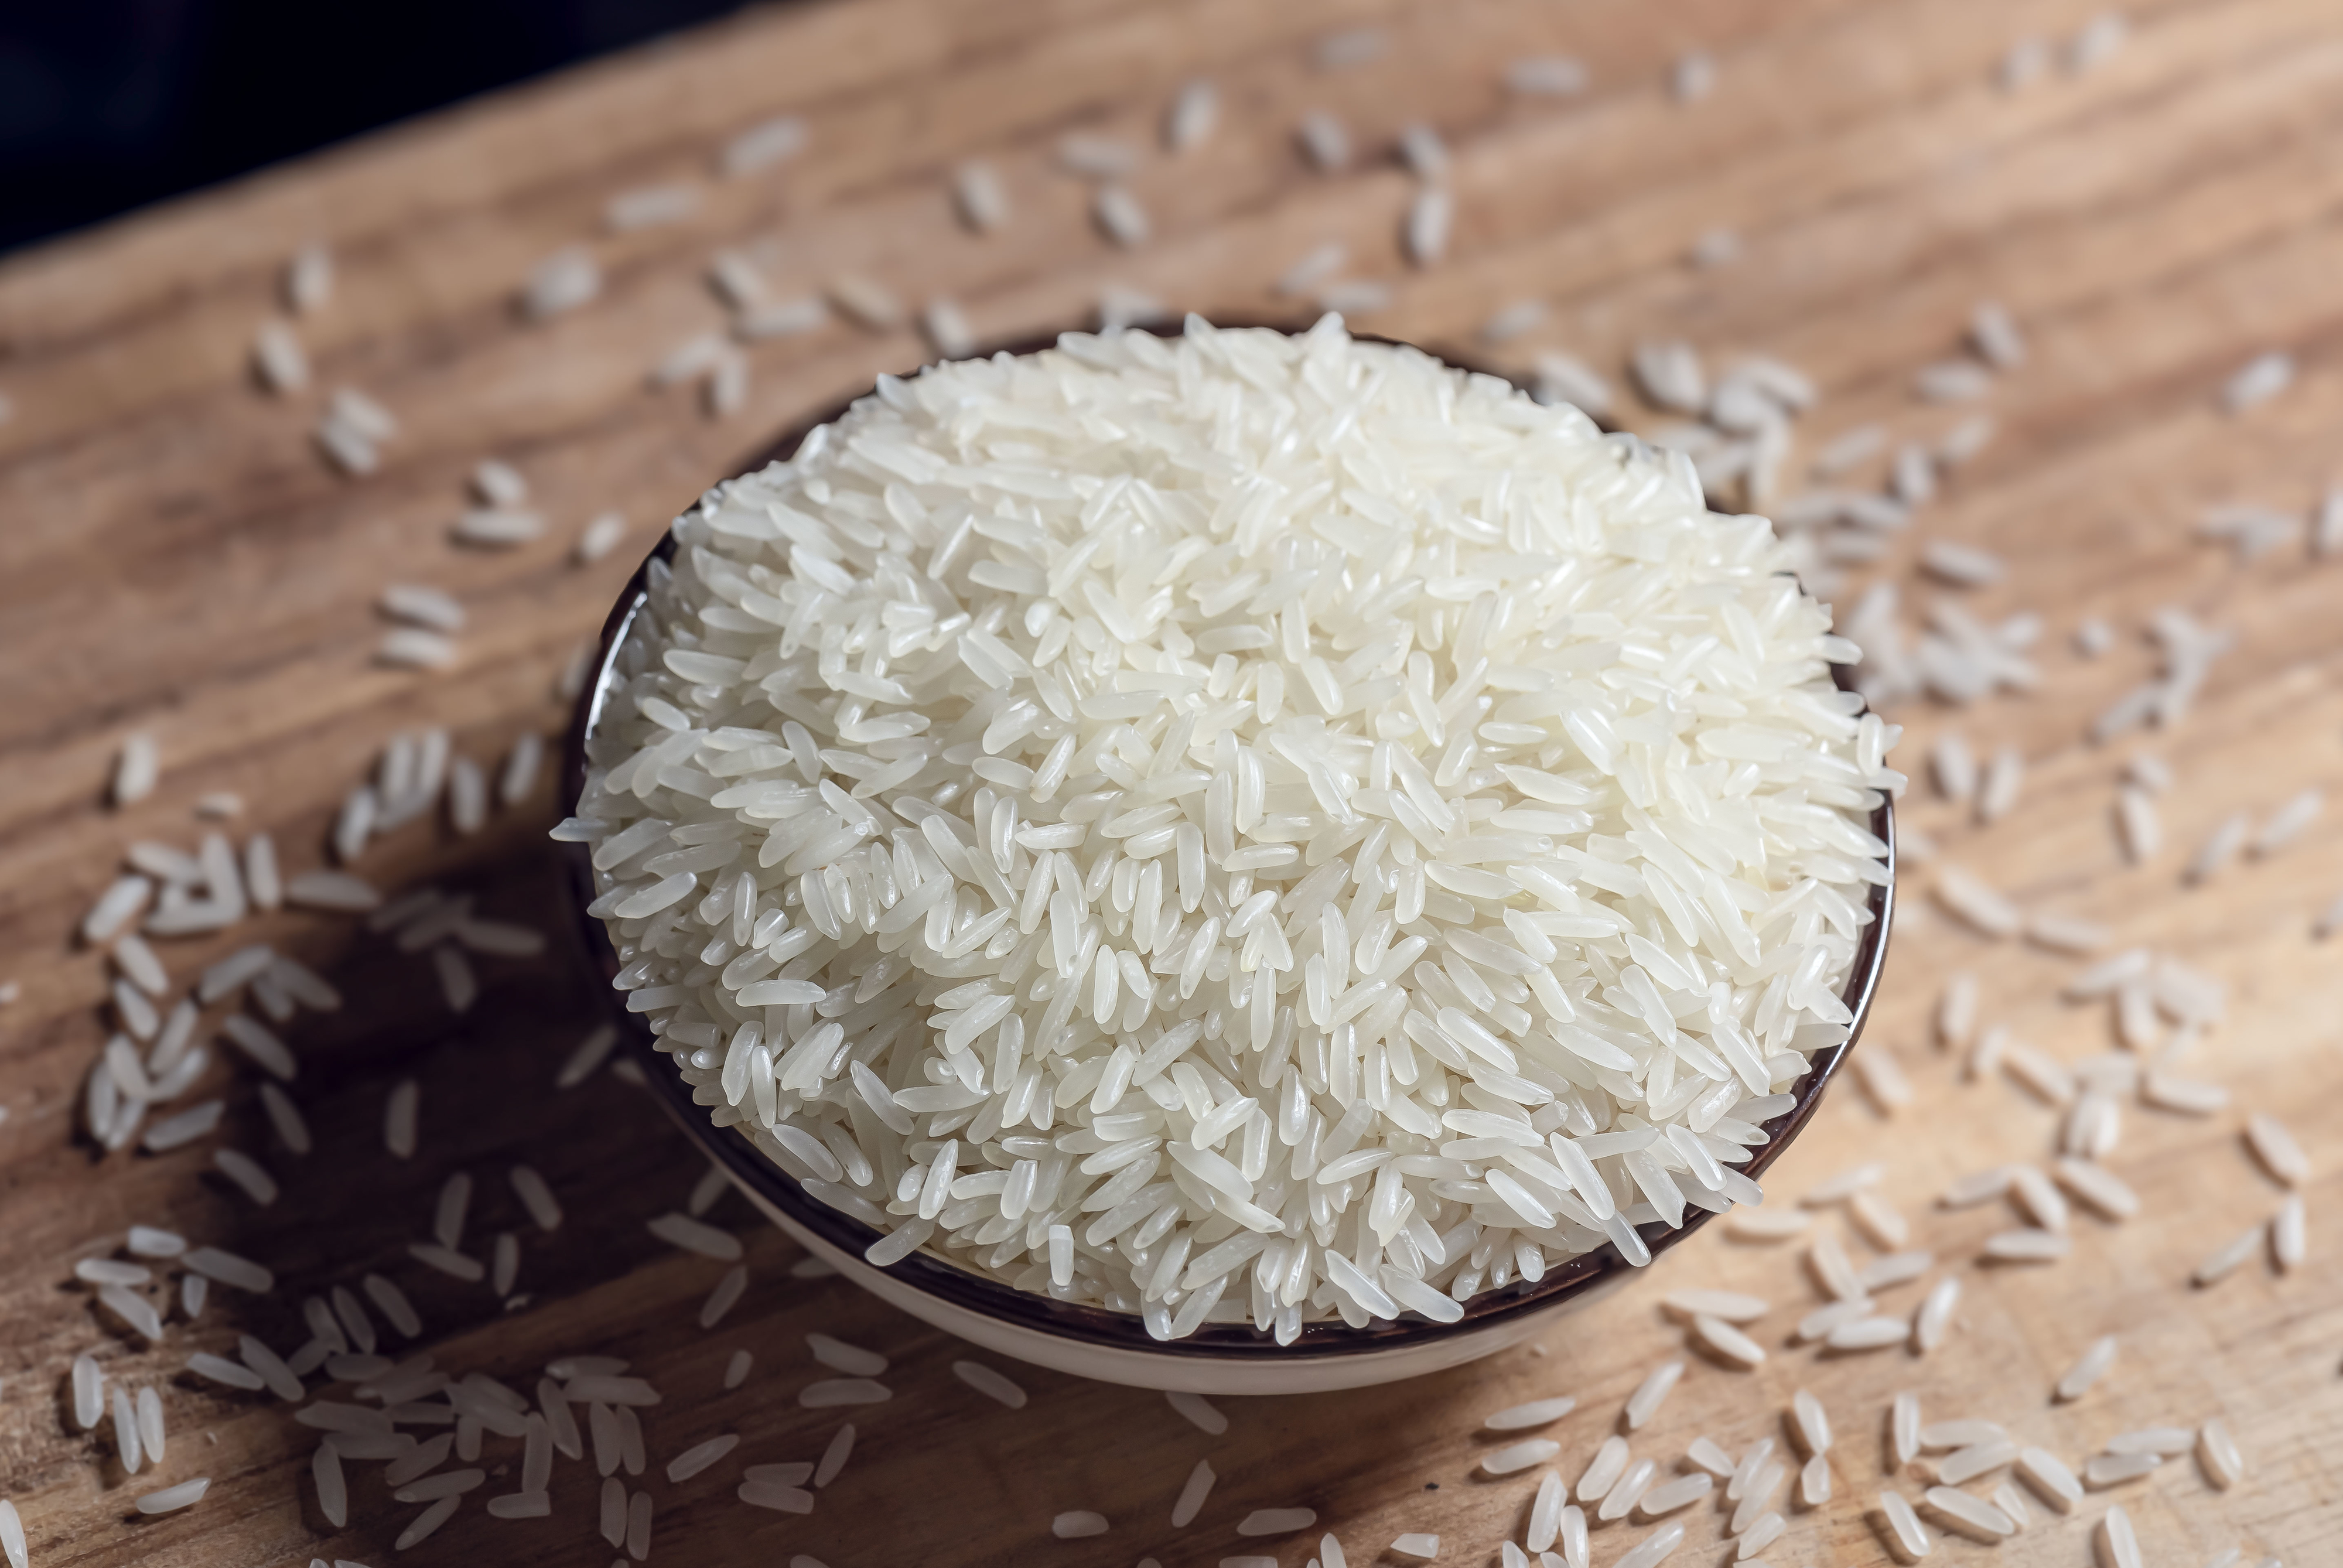 Bowl of uncooked white rice on a wooden surface with grains scattered around it